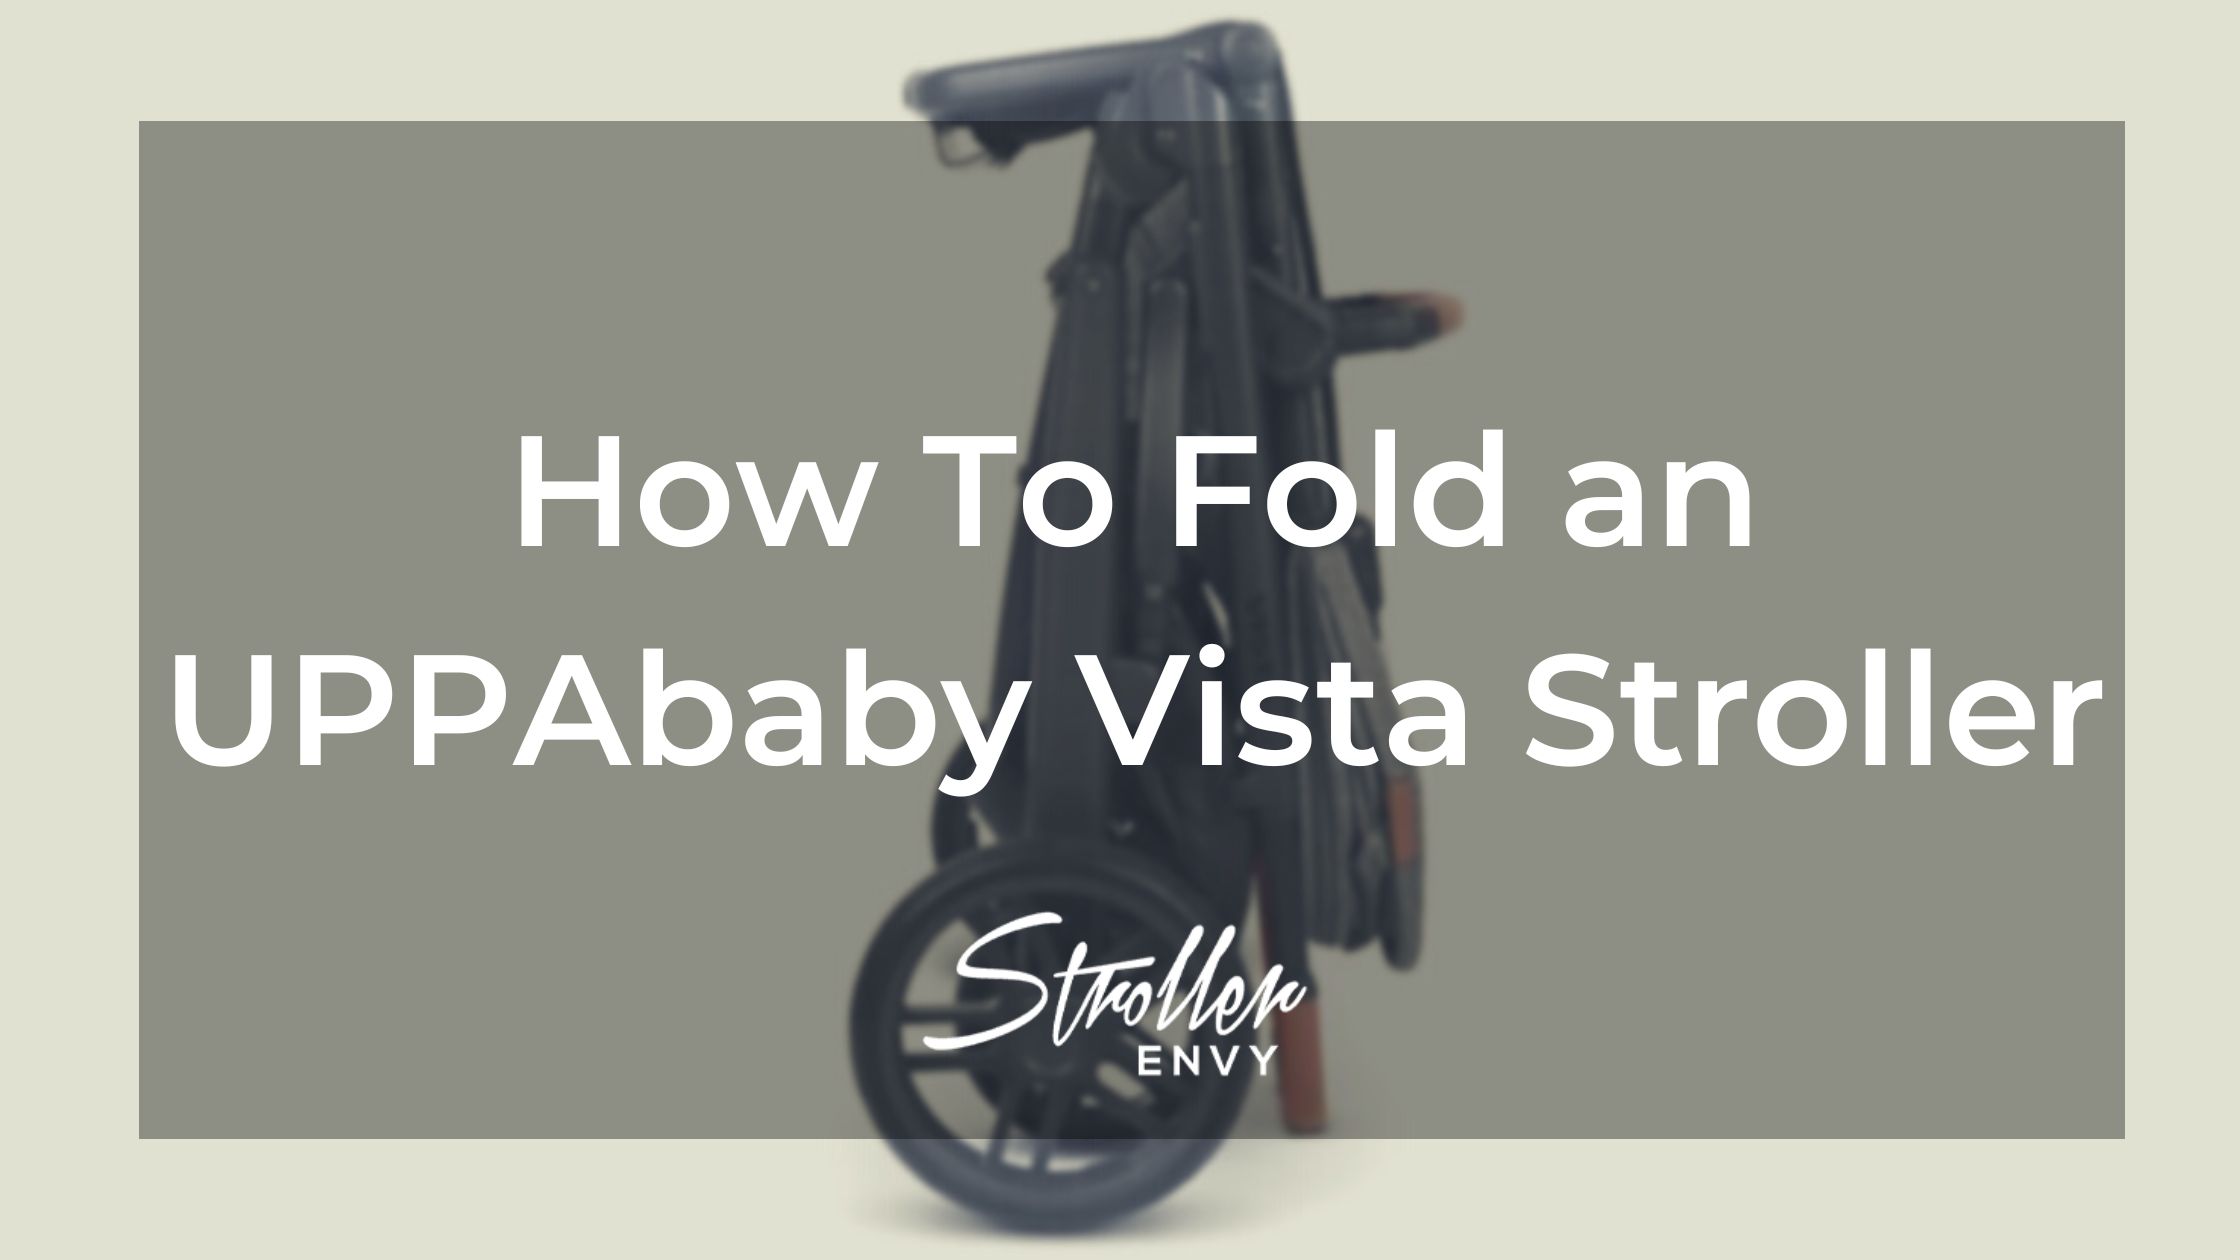 How To Fold an UPPAbaby Vista Stroller